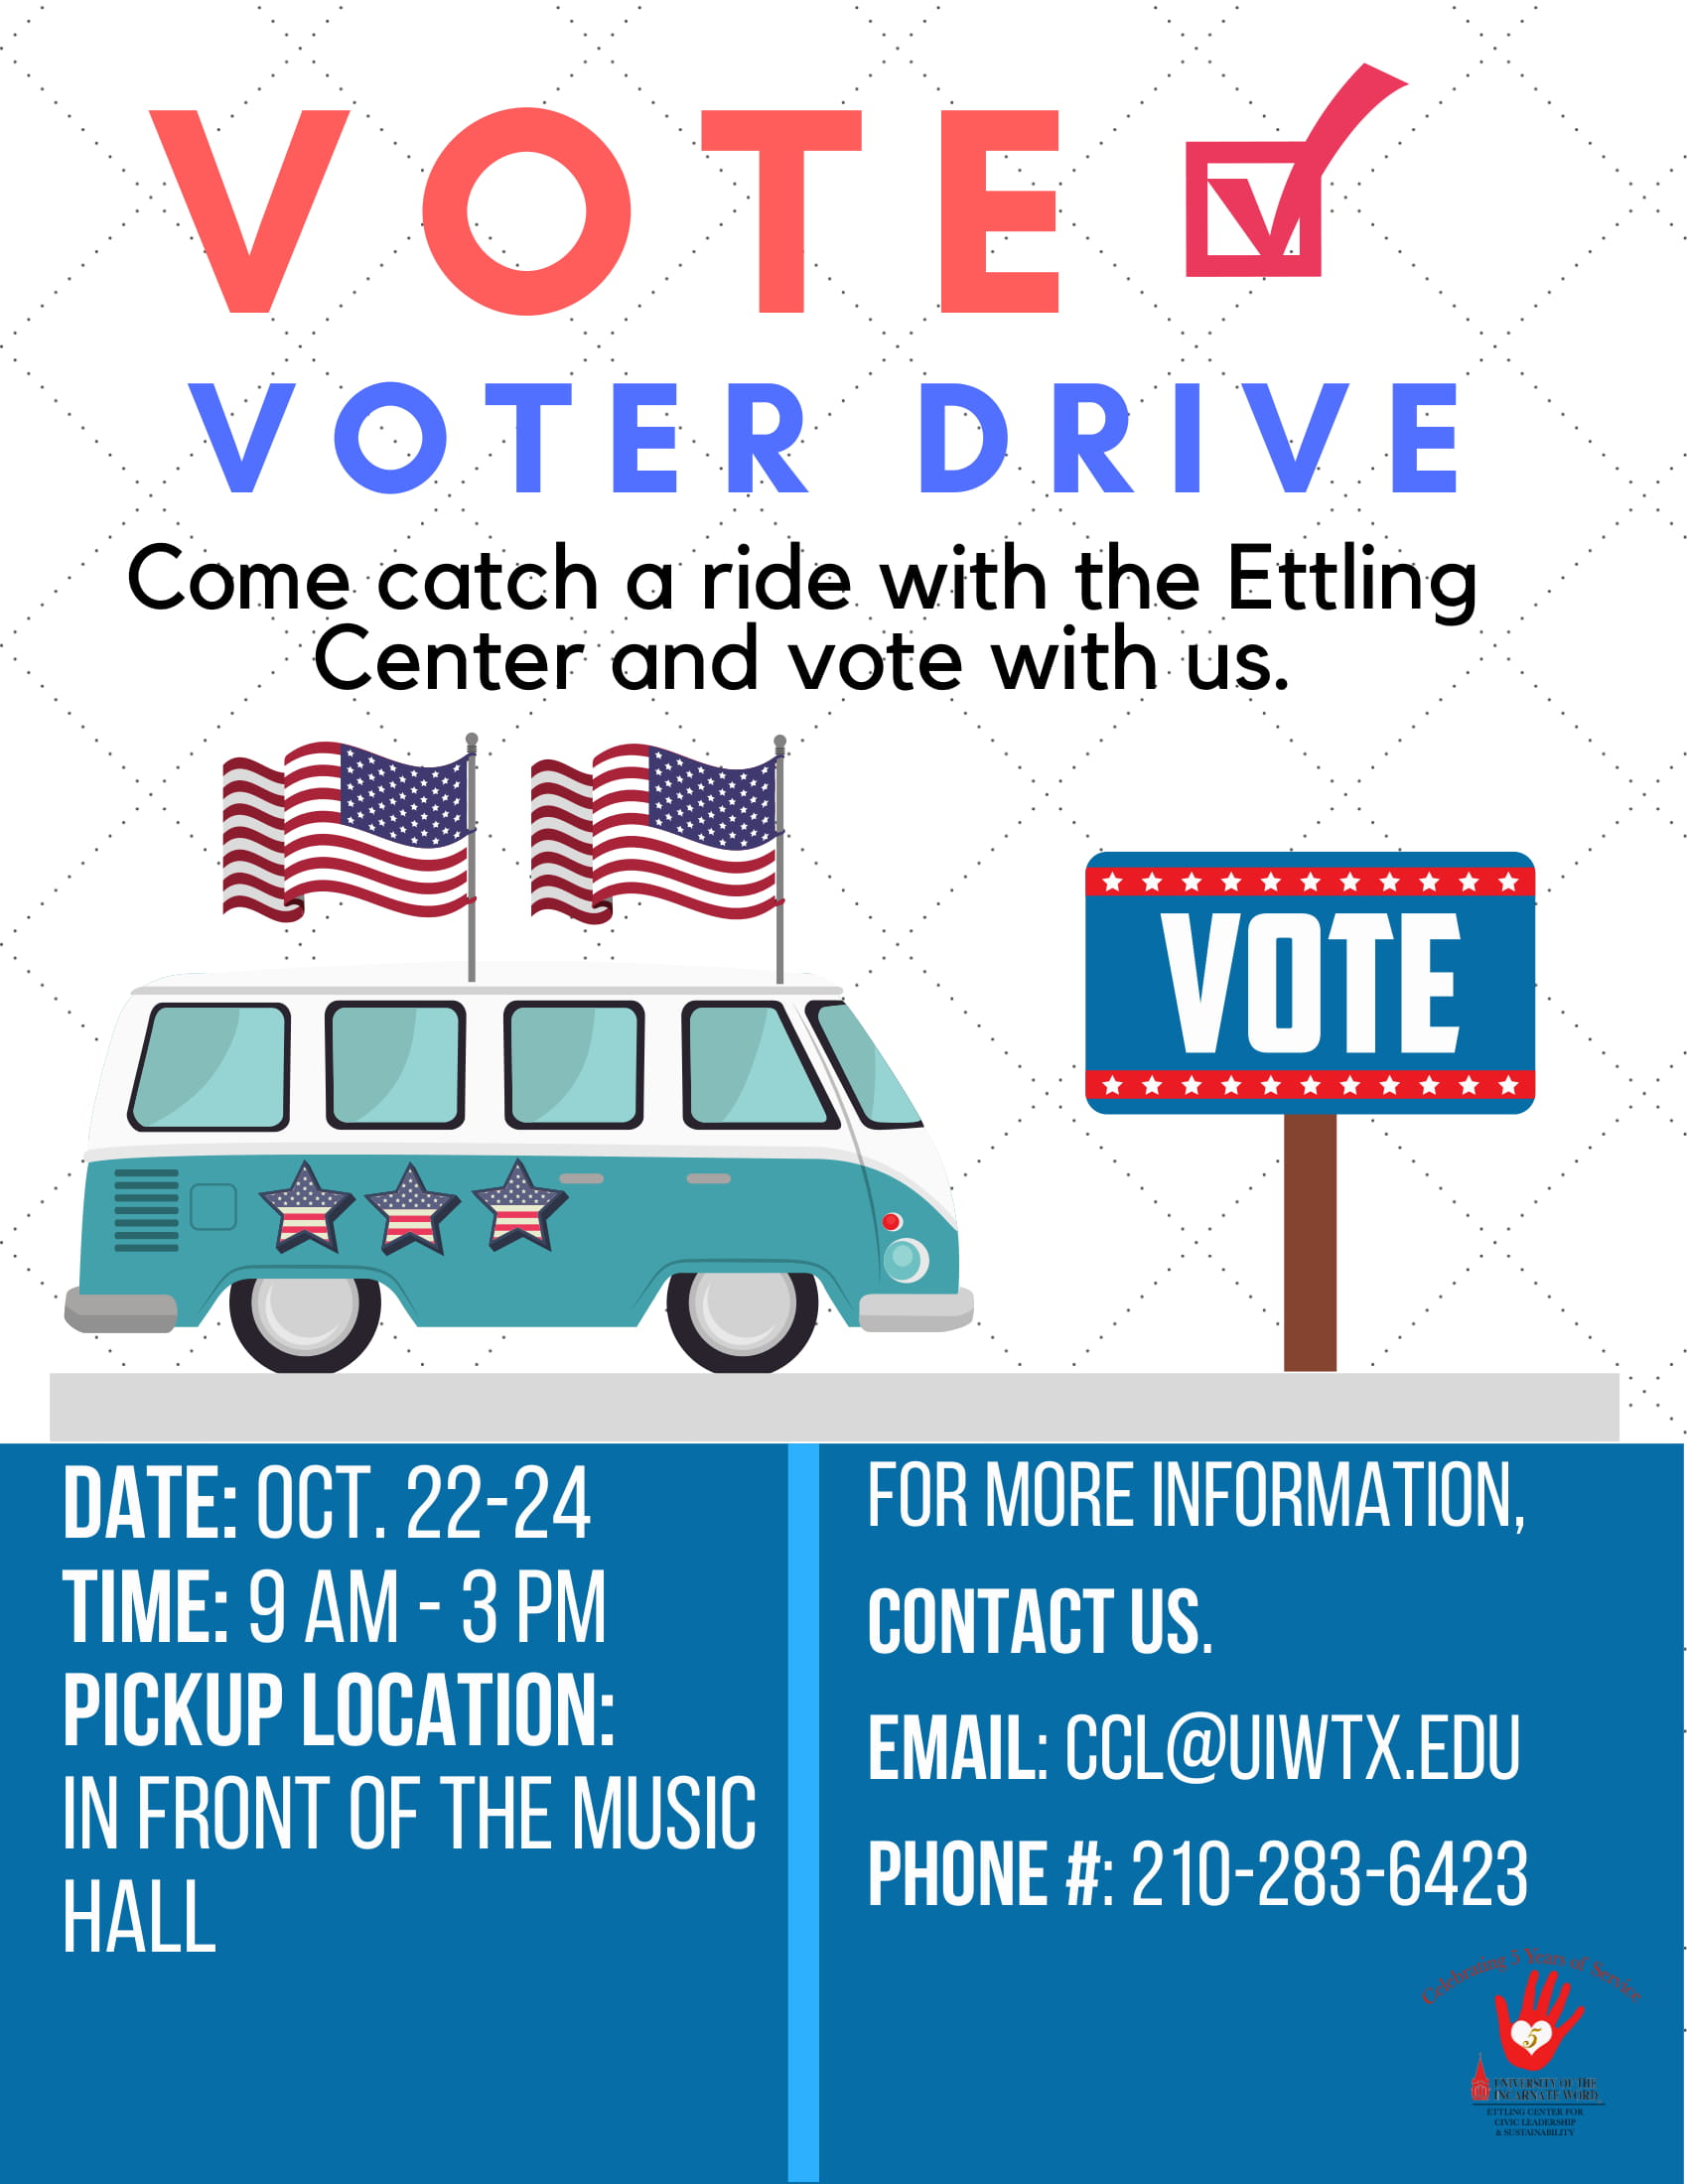 UIW Voter Drive